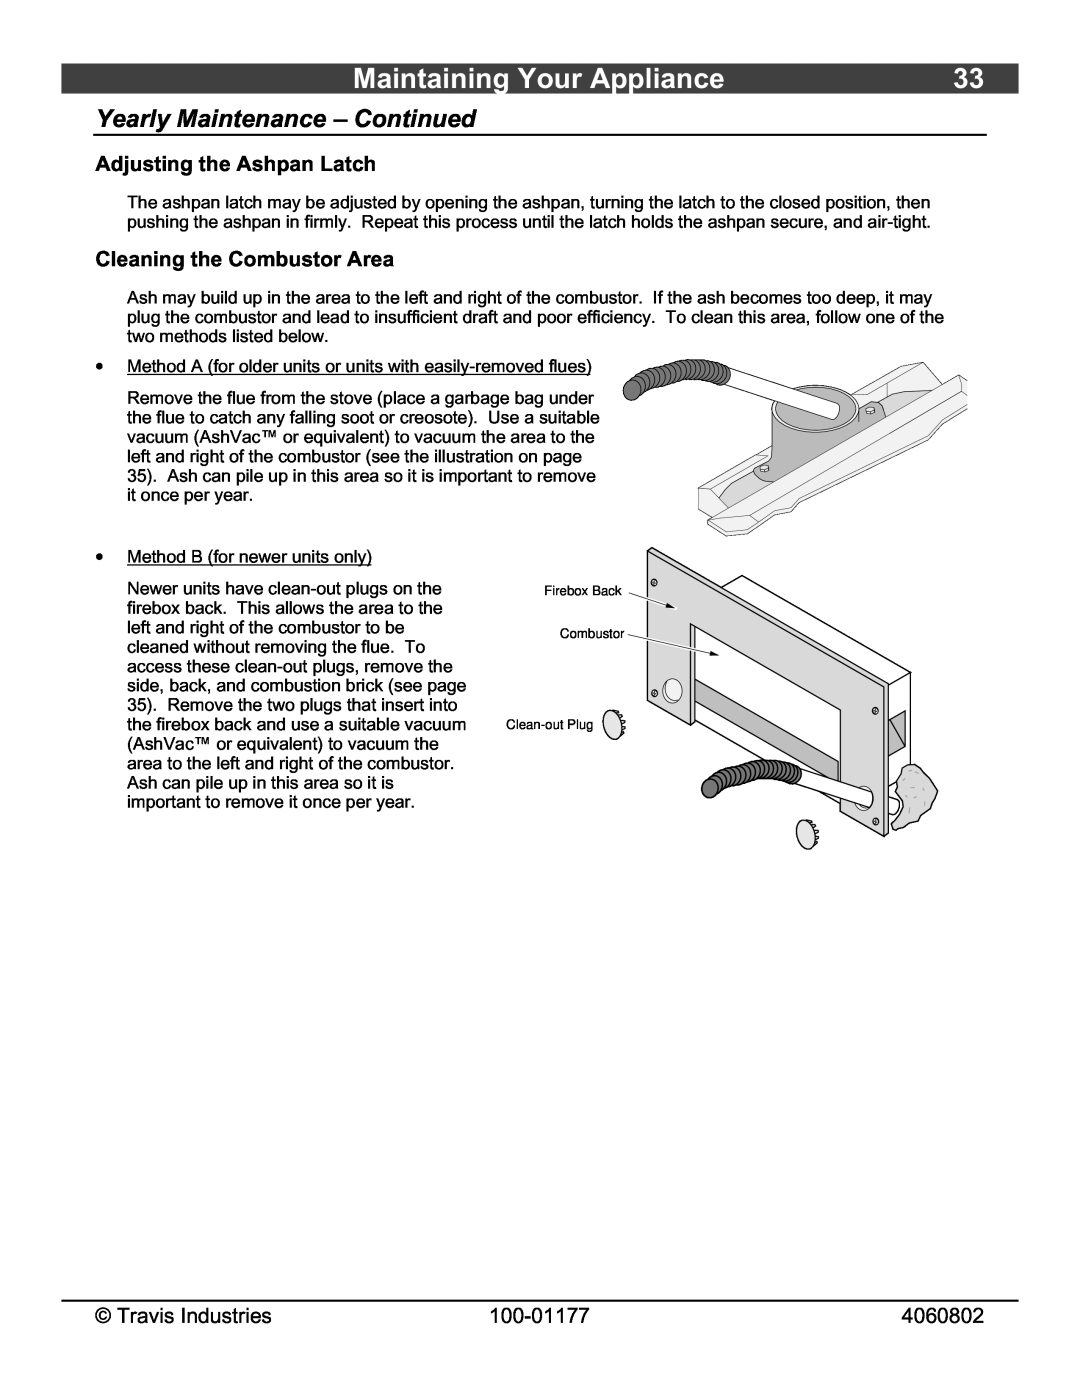 Lopi Stove owner manual Maintaining Your Appliance, Yearly Maintenance - Continued, Adjusting the Ashpan Latch 